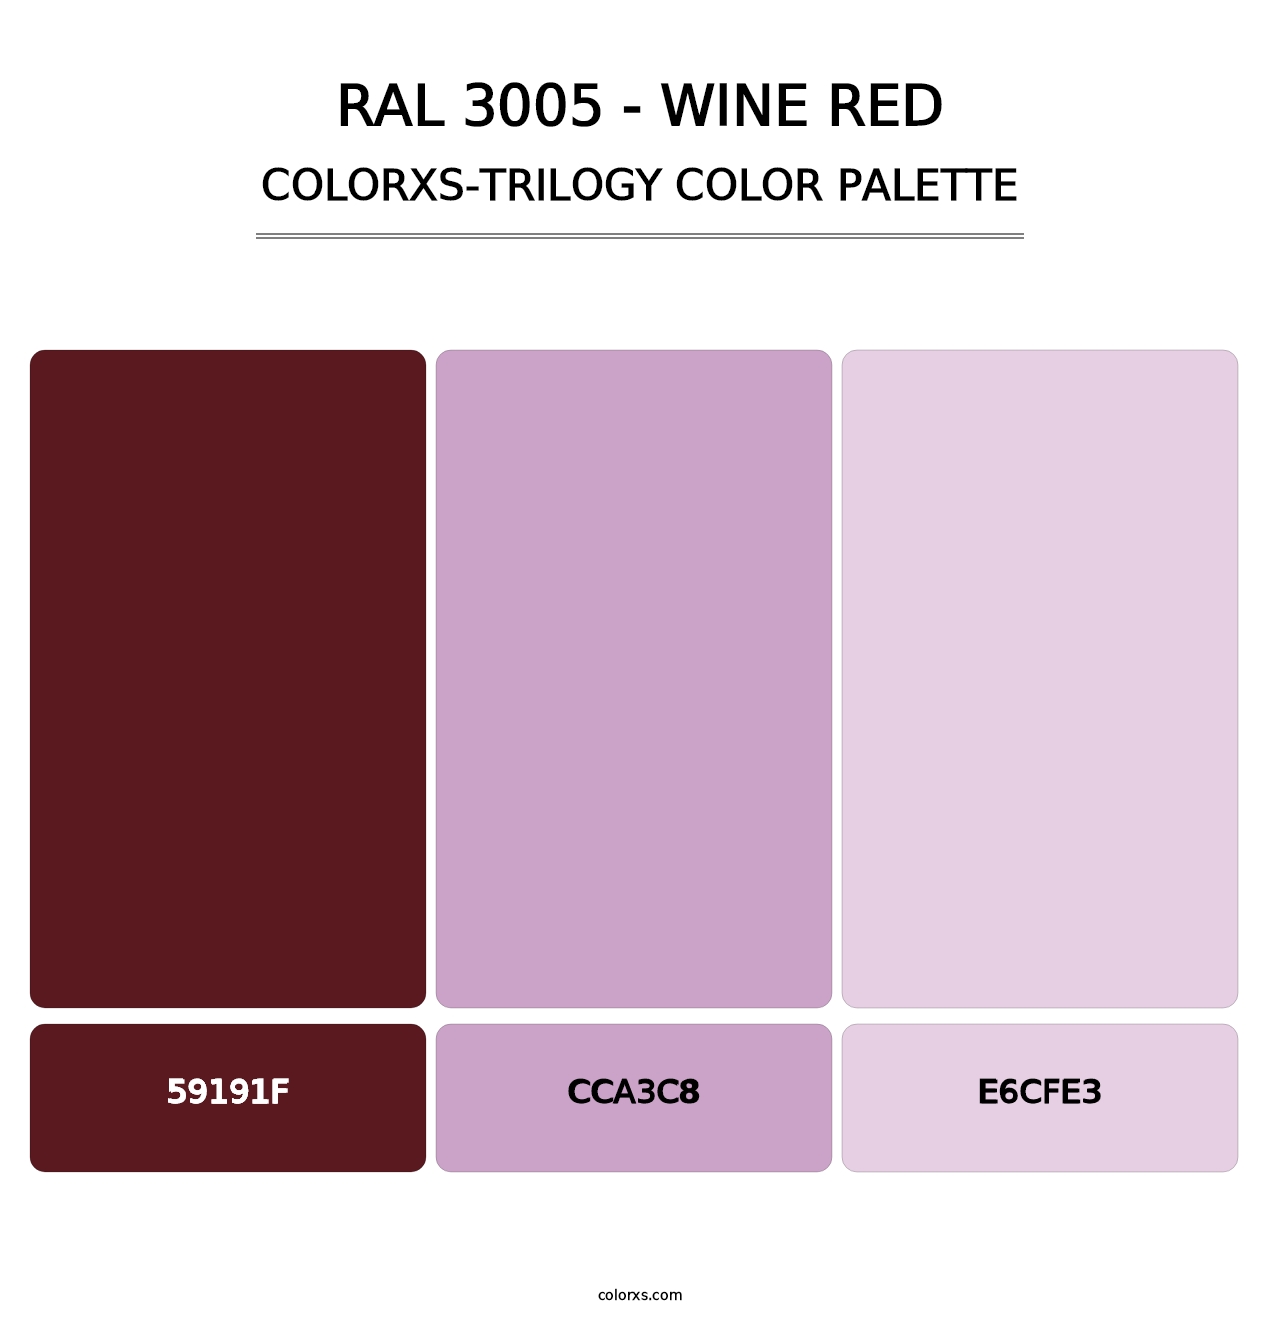 RAL 3005 - Wine Red - Colorxs Trilogy Palette